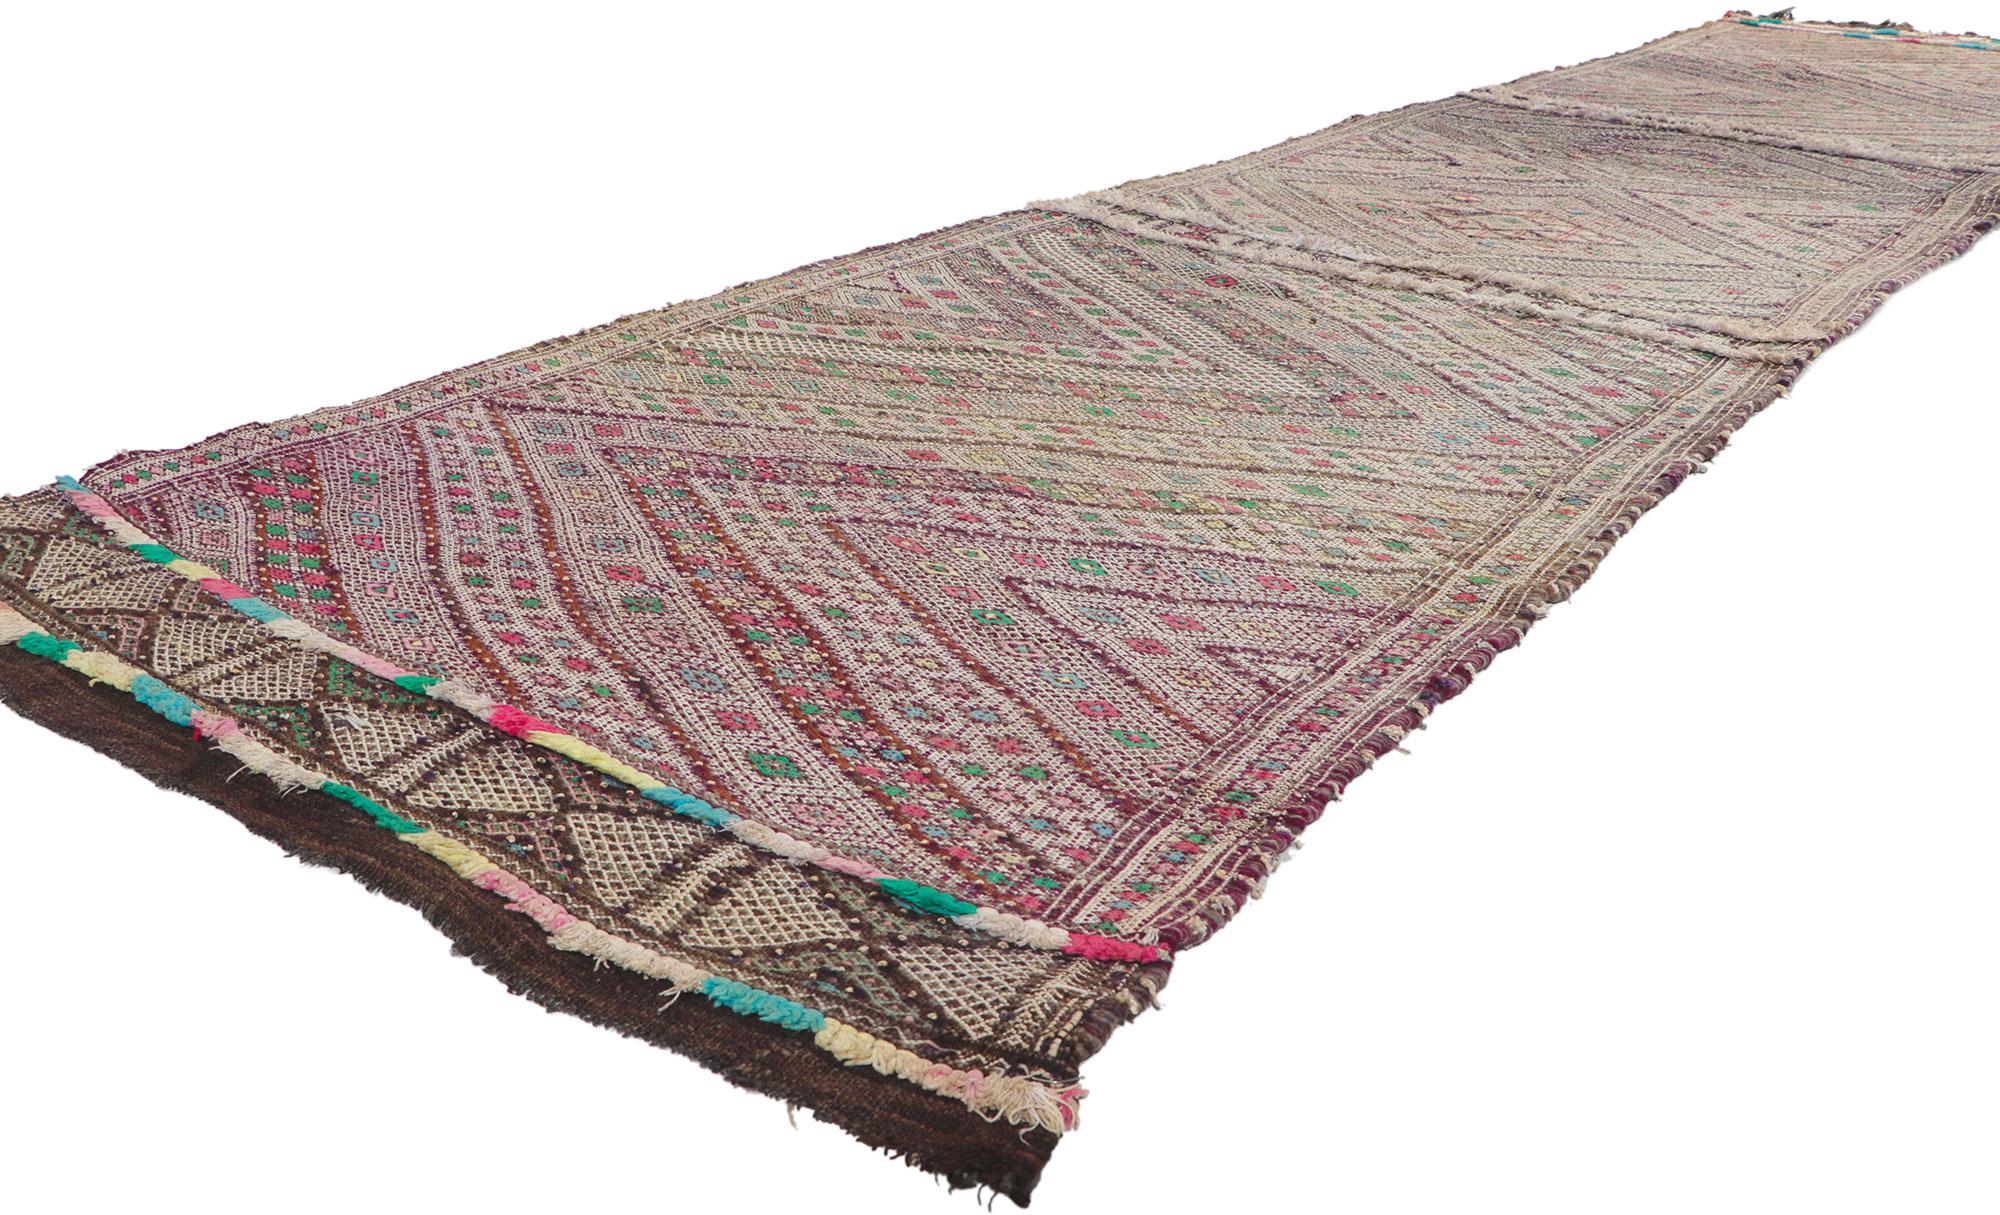 21713 Vintage Zemmour Moroccan Kilim Runner, 03'03 x 14'03. Full of tiny details and tribal style, this hand-woven wool vintage Zemmour Berber Moroccan kilim rug runner is a captivating vision of woven beauty. The abrashed field is composed of